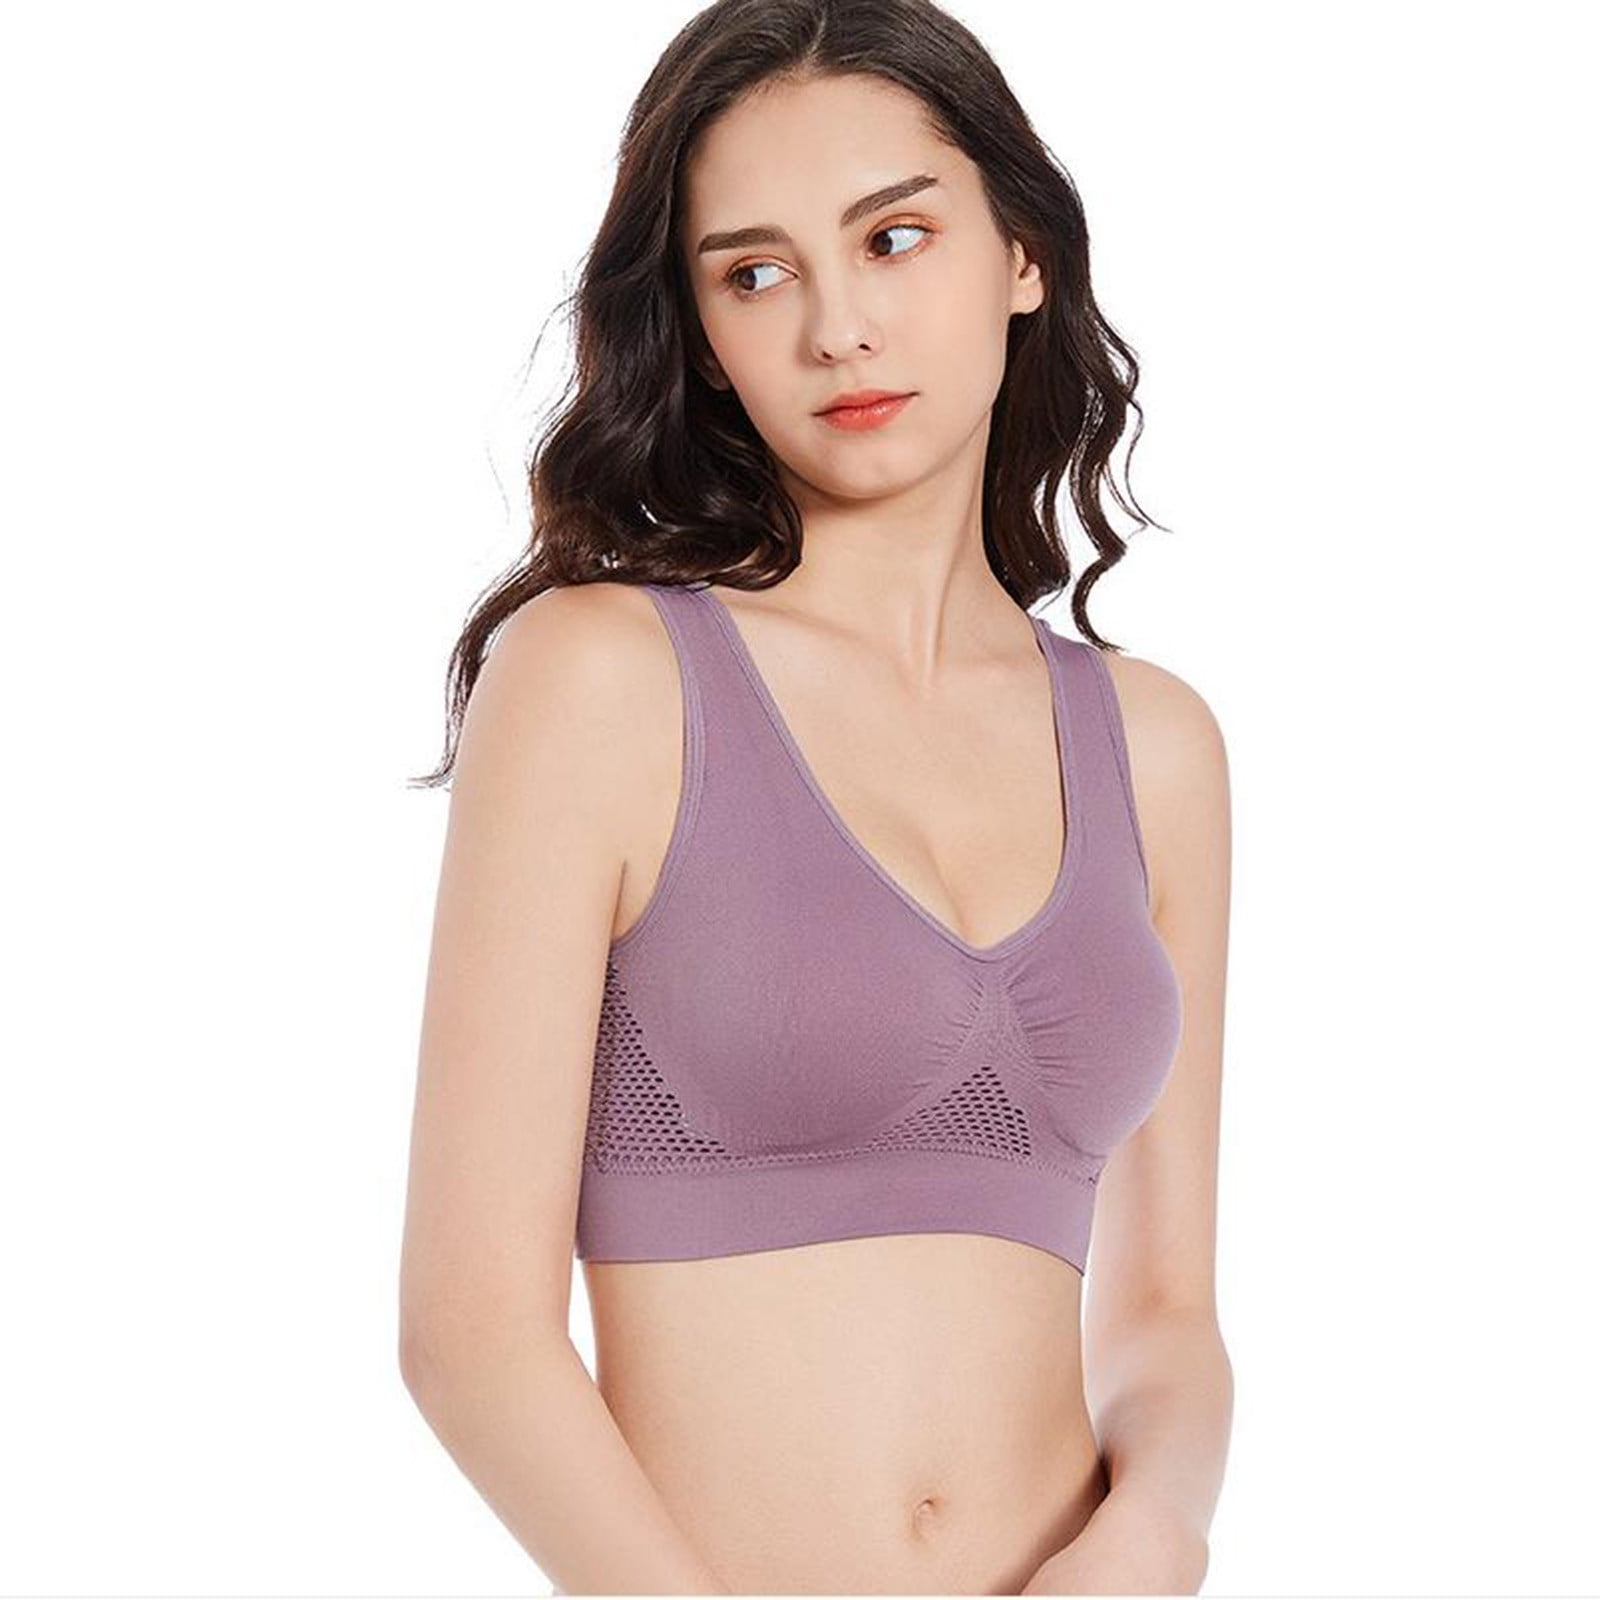 Daqian Clearance Bras for Women Ladies Comfortable Breathable No